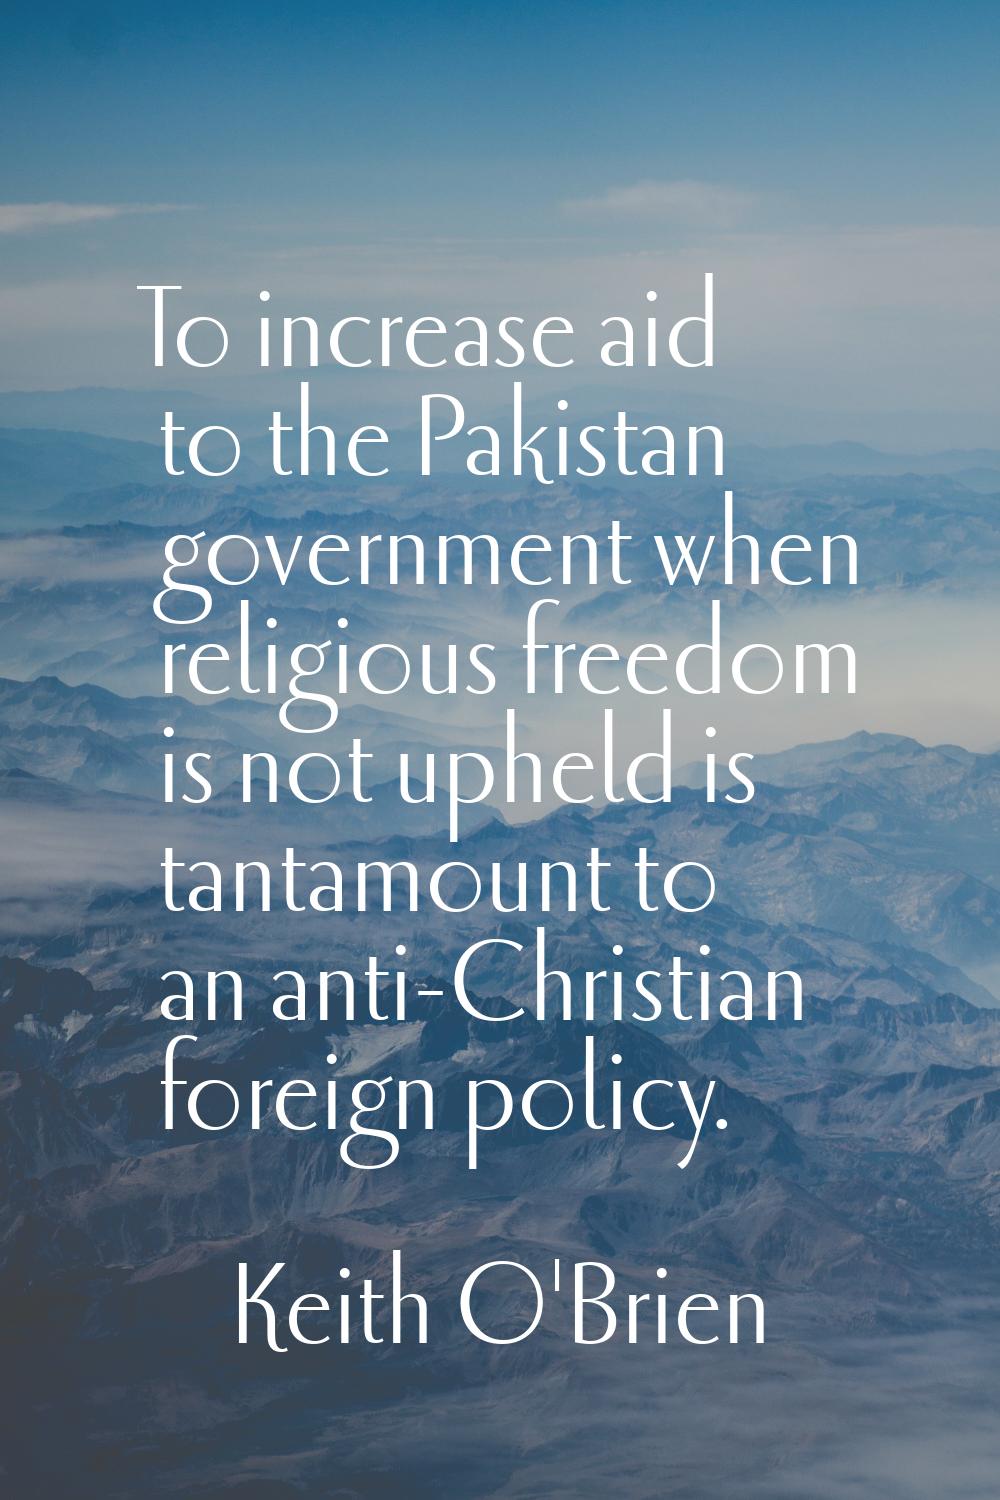 To increase aid to the Pakistan government when religious freedom is not upheld is tantamount to an